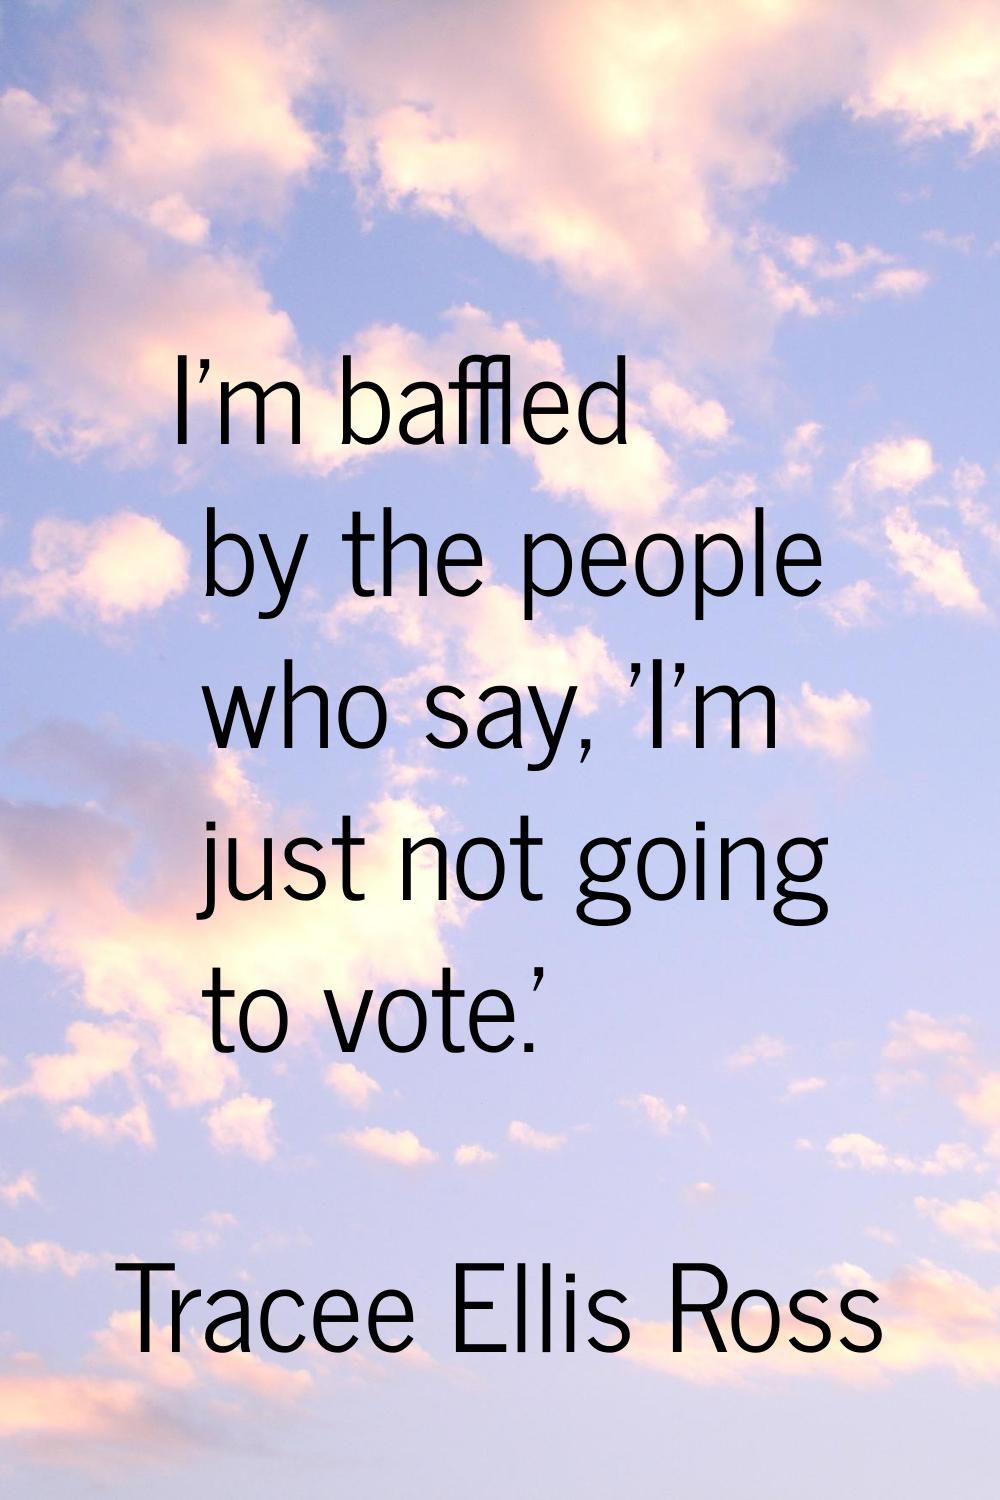 I'm baffled by the people who say, 'I'm just not going to vote.'